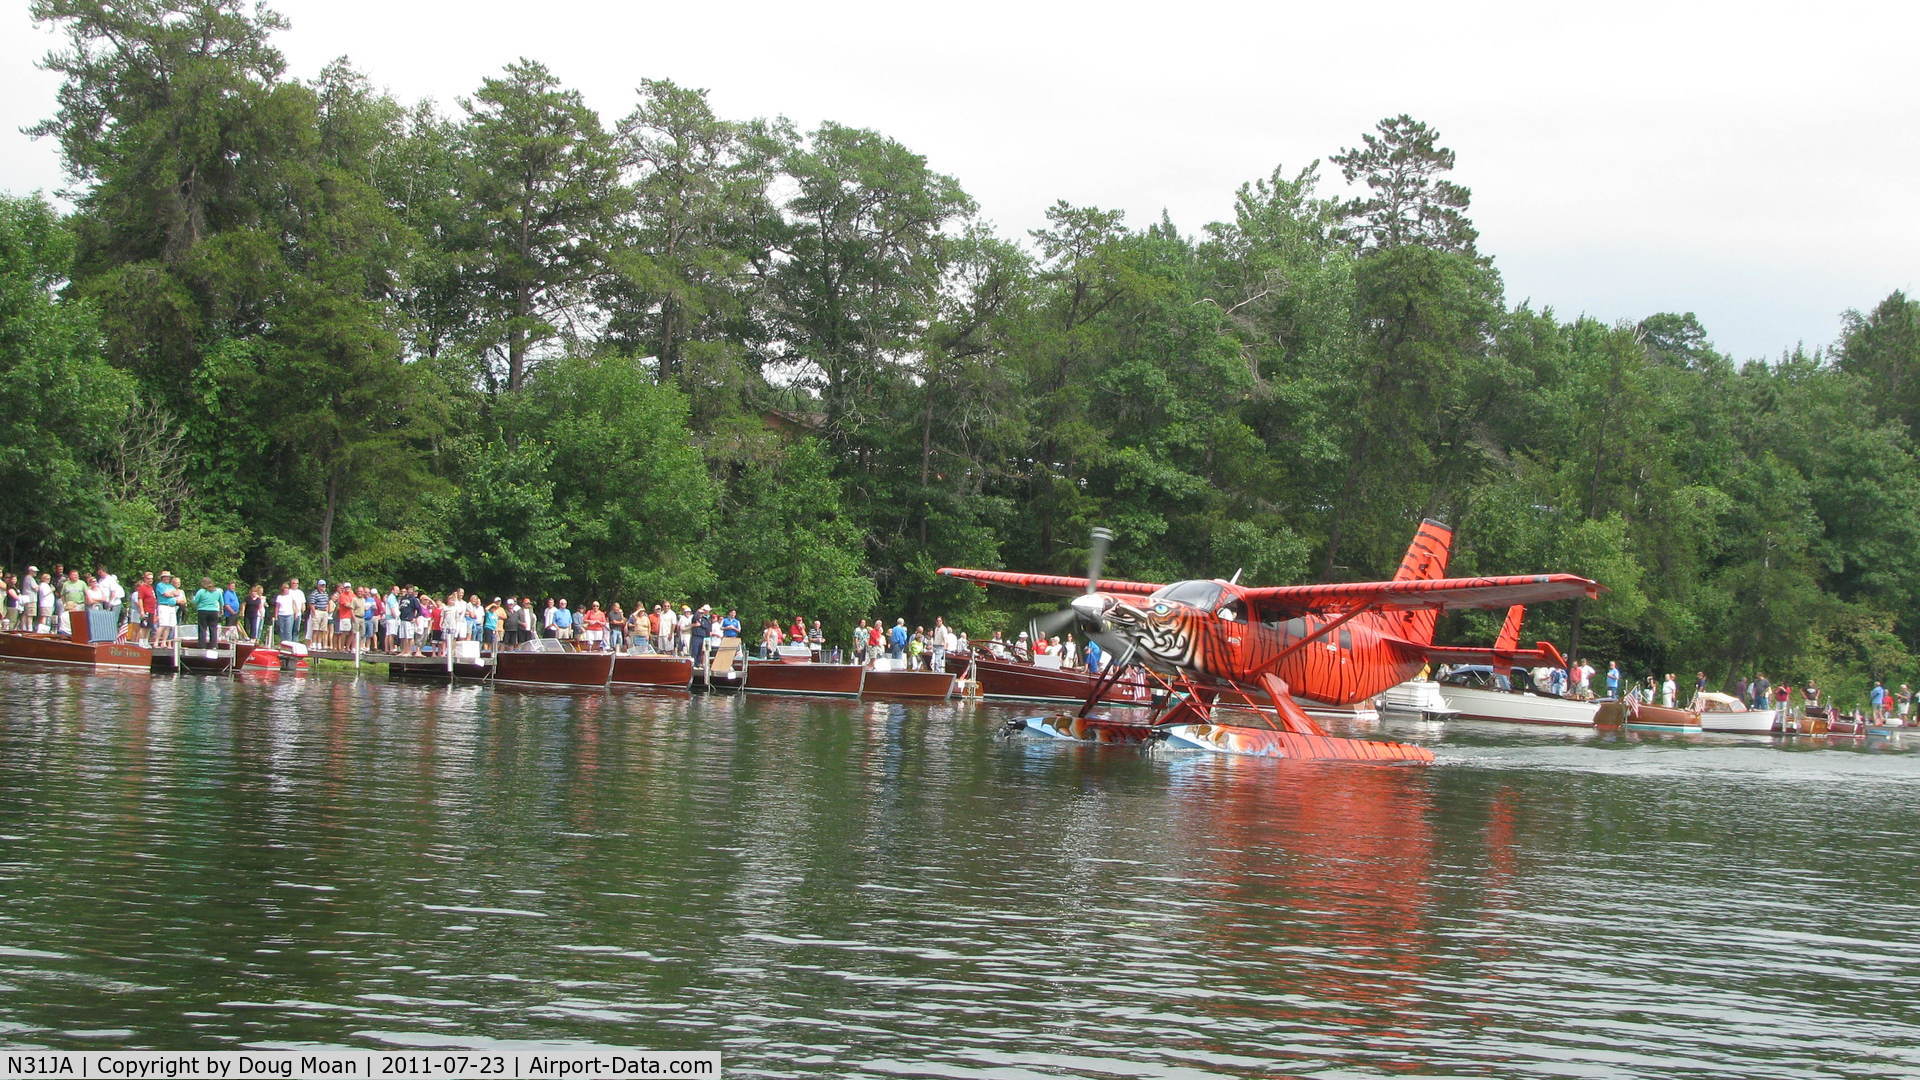 N31JA, 2010 Quest Kodiak 100 C/N 100-0042, Checking out  old Classic Boats with the Kodiak !